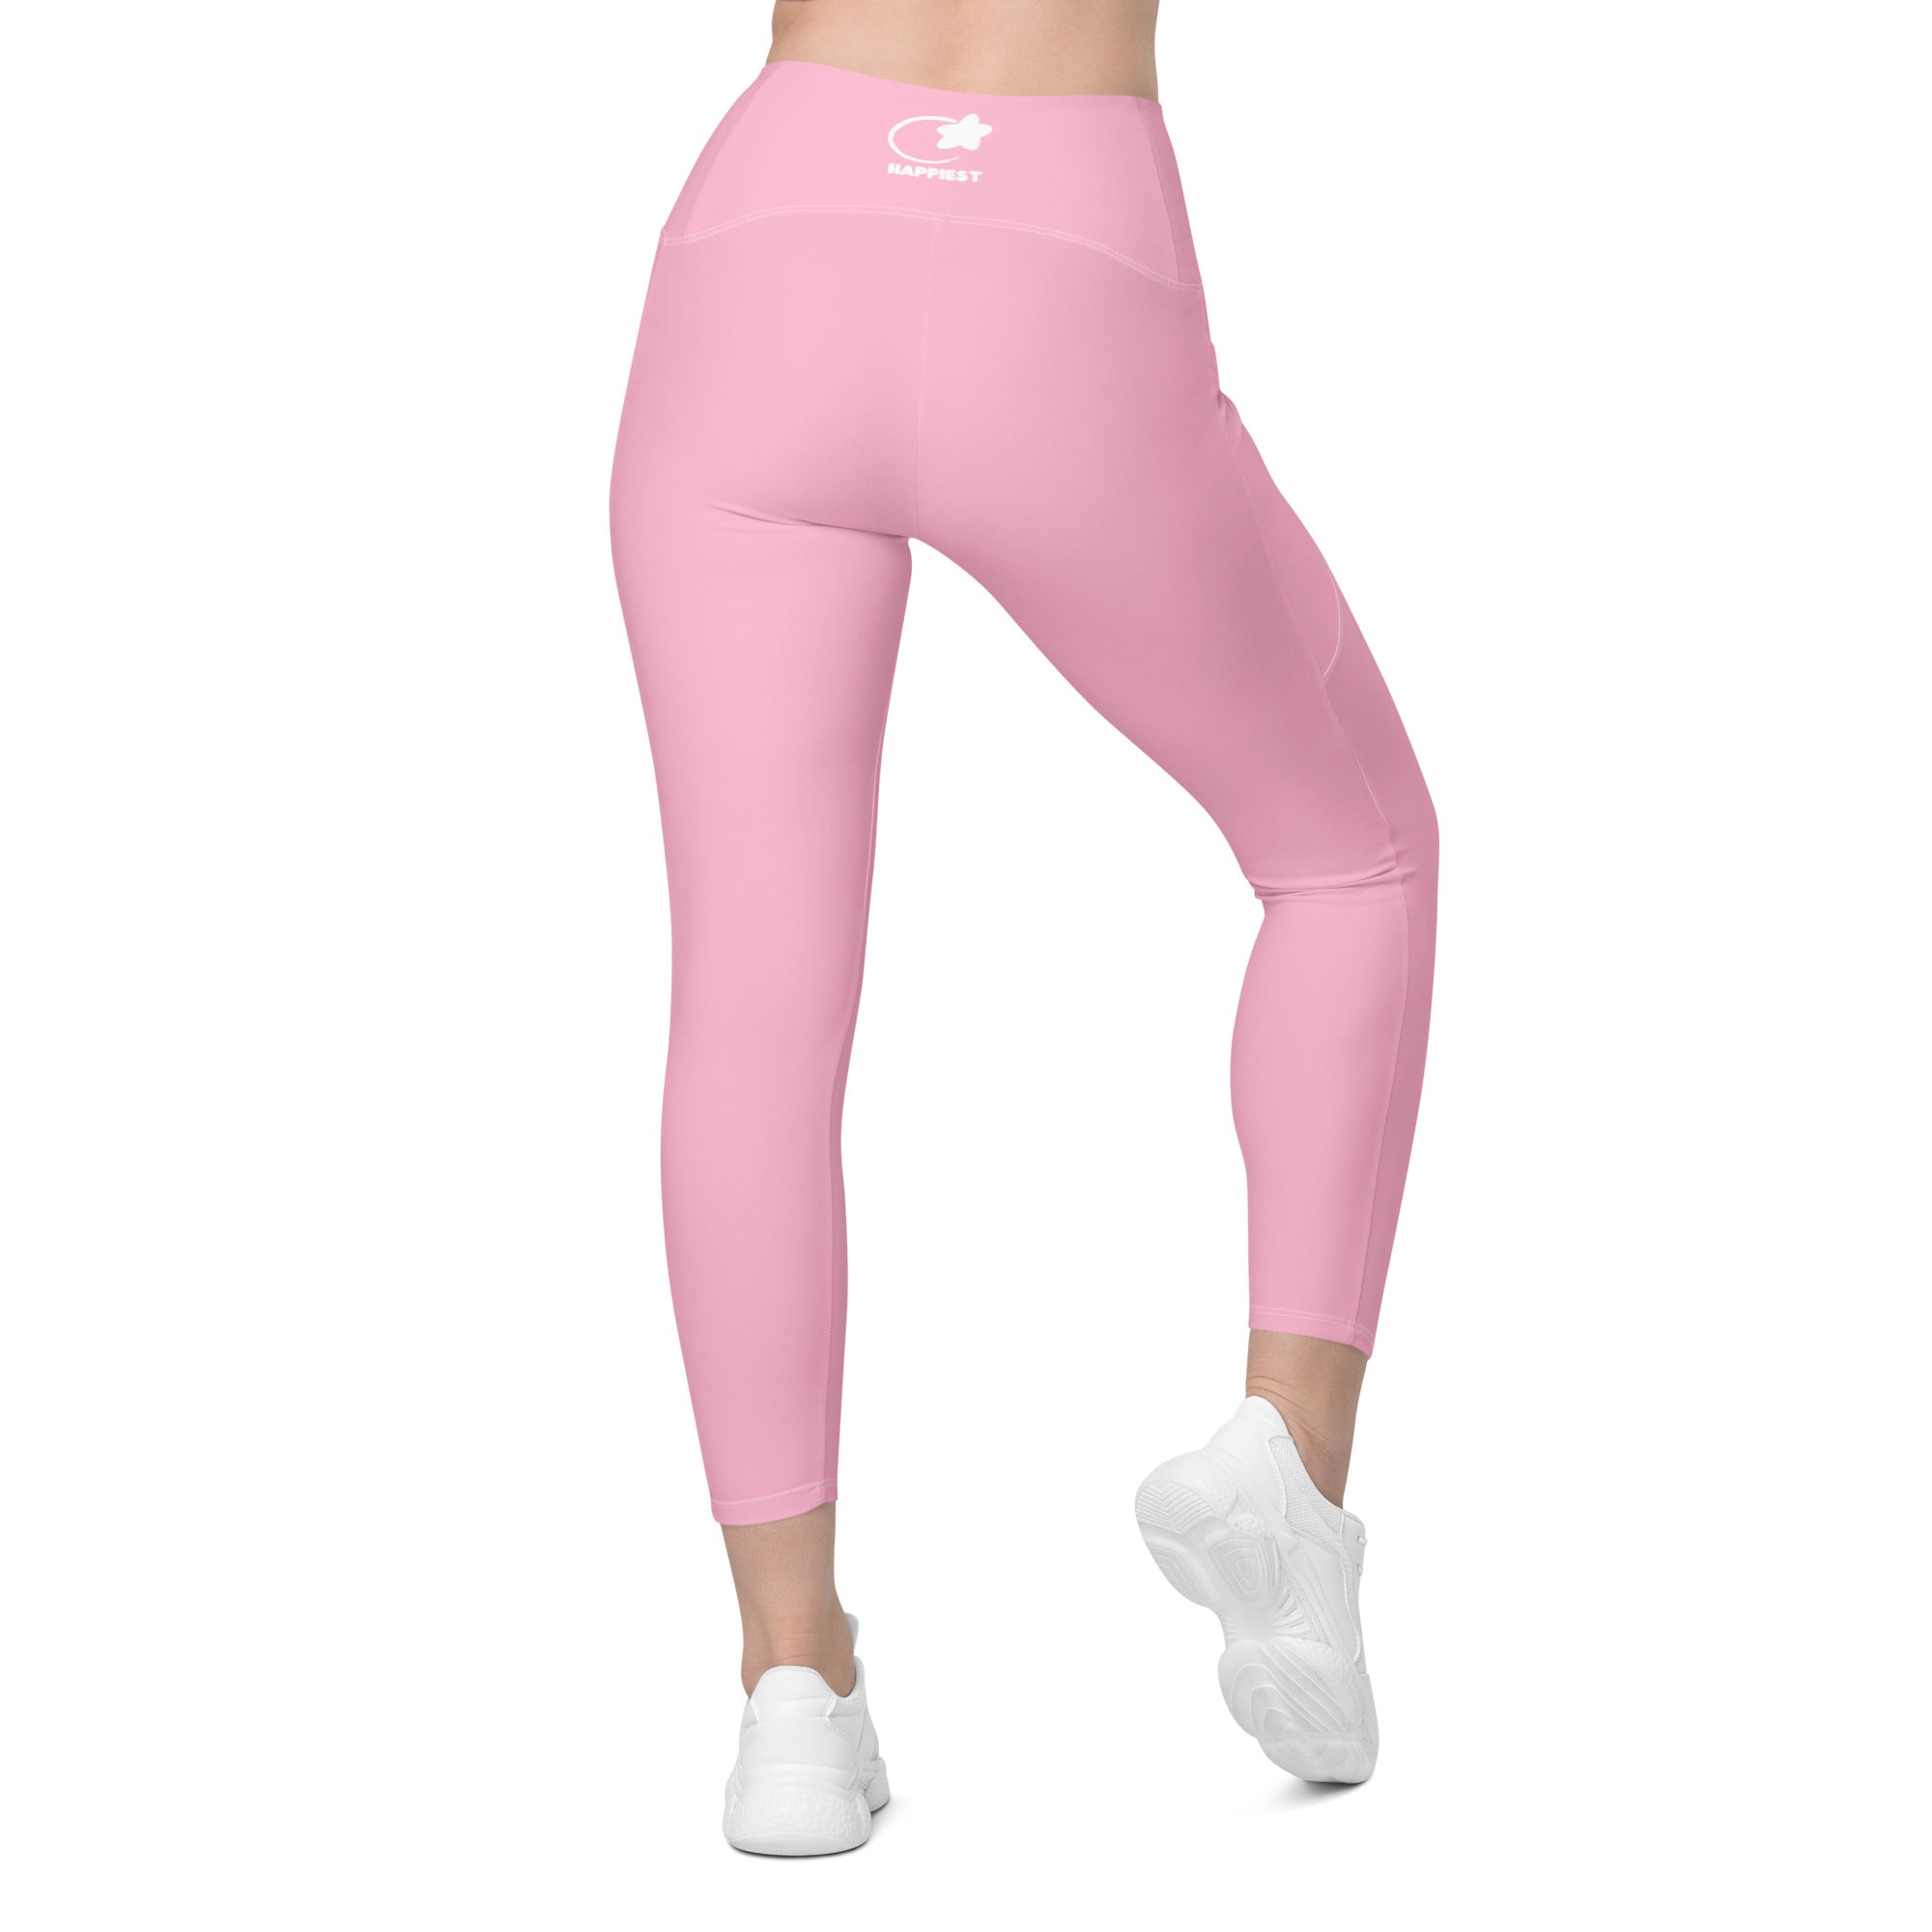 Cotton Candy Leggings with pockets